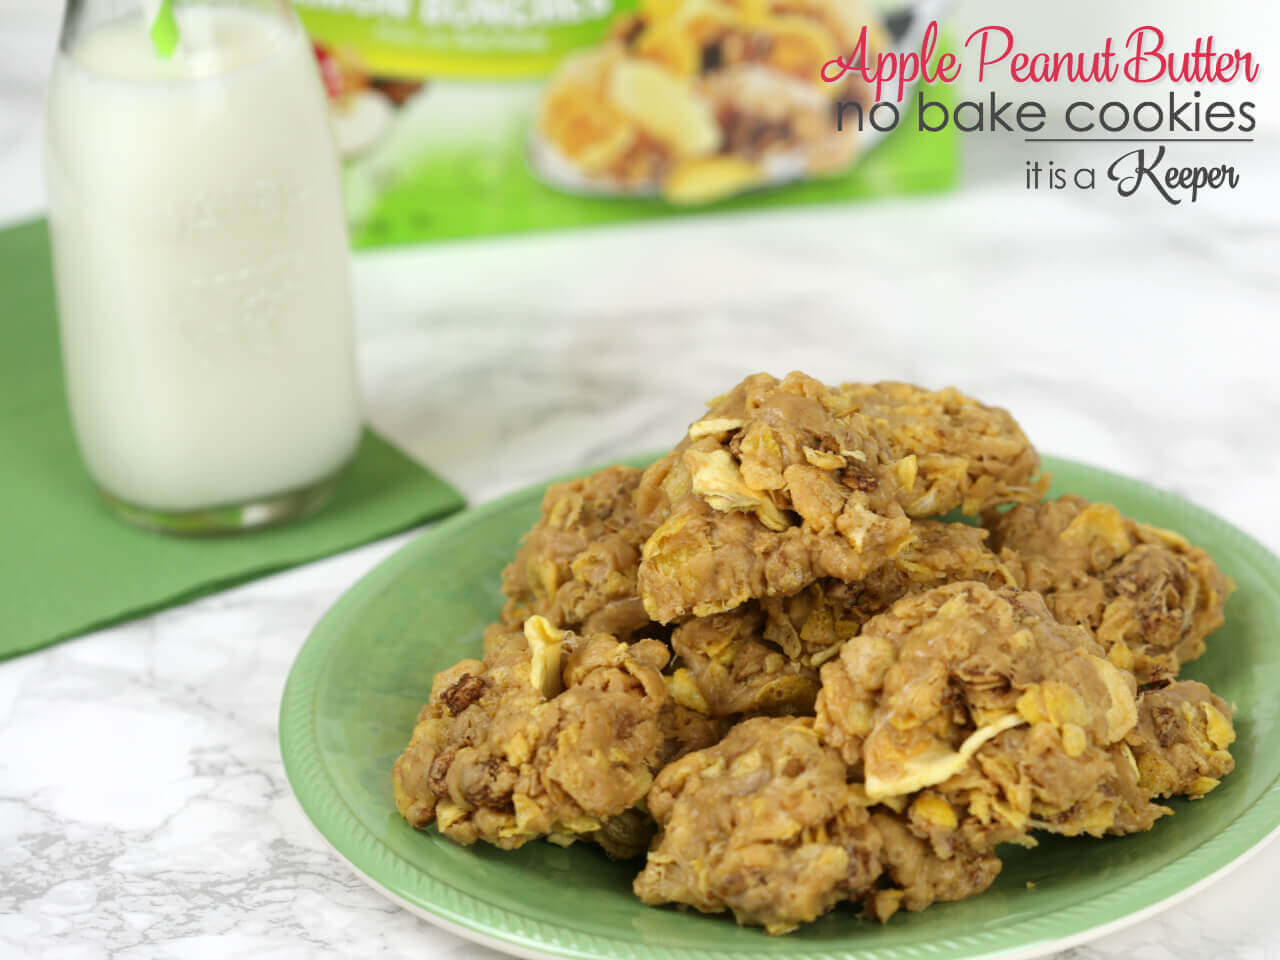 Apple Peanut Butter No Bake Cookies - this easy recipe is a great snack or dessert